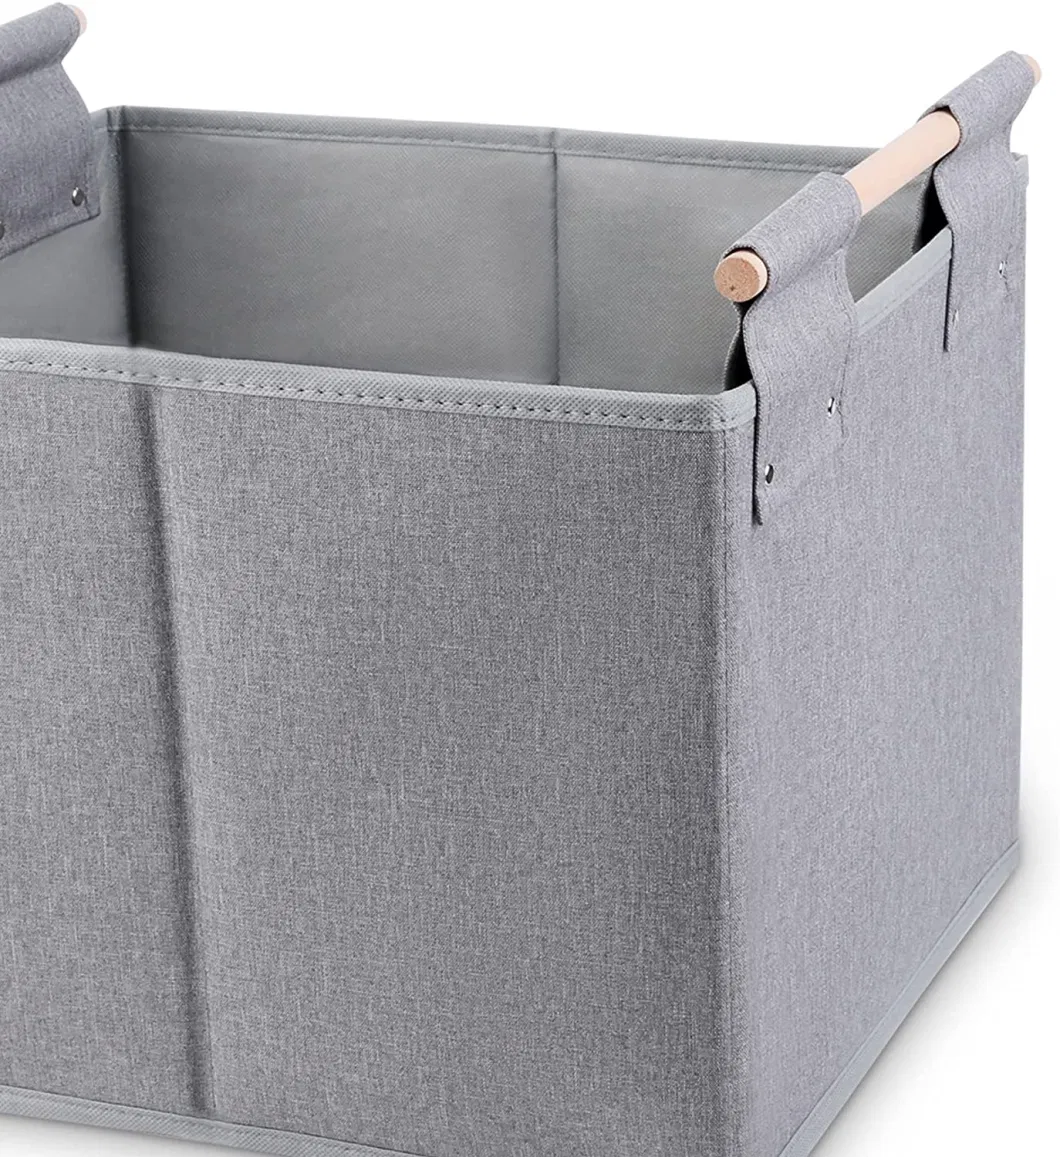 Large Foldable Storage Bins, Linen Fabric, 2 Pack, with Wooden Carry Handles